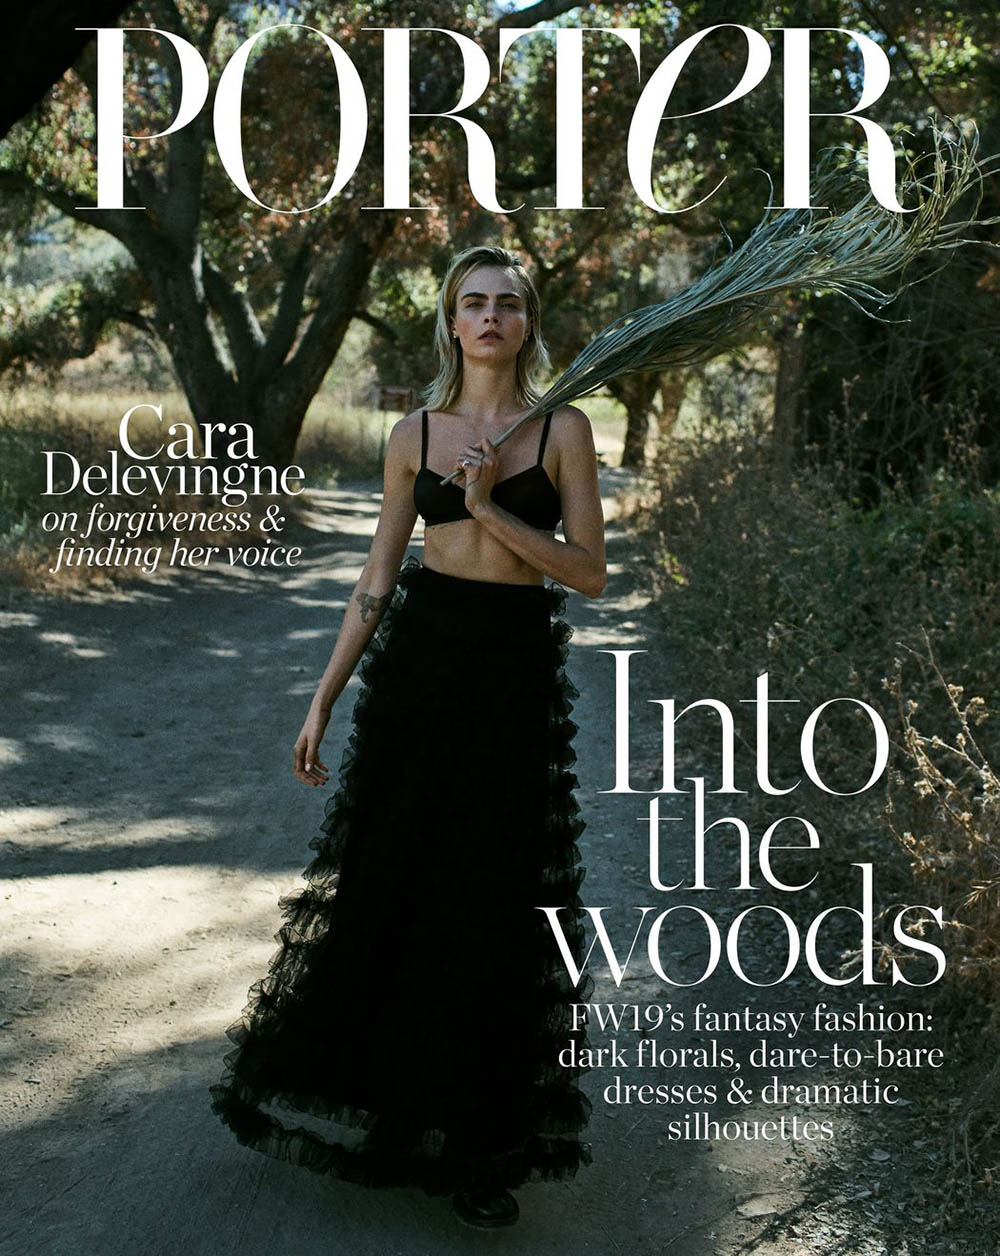 Cara Delevingne covers Porter Edit September 13th, 2019 by Sonia Szóstak